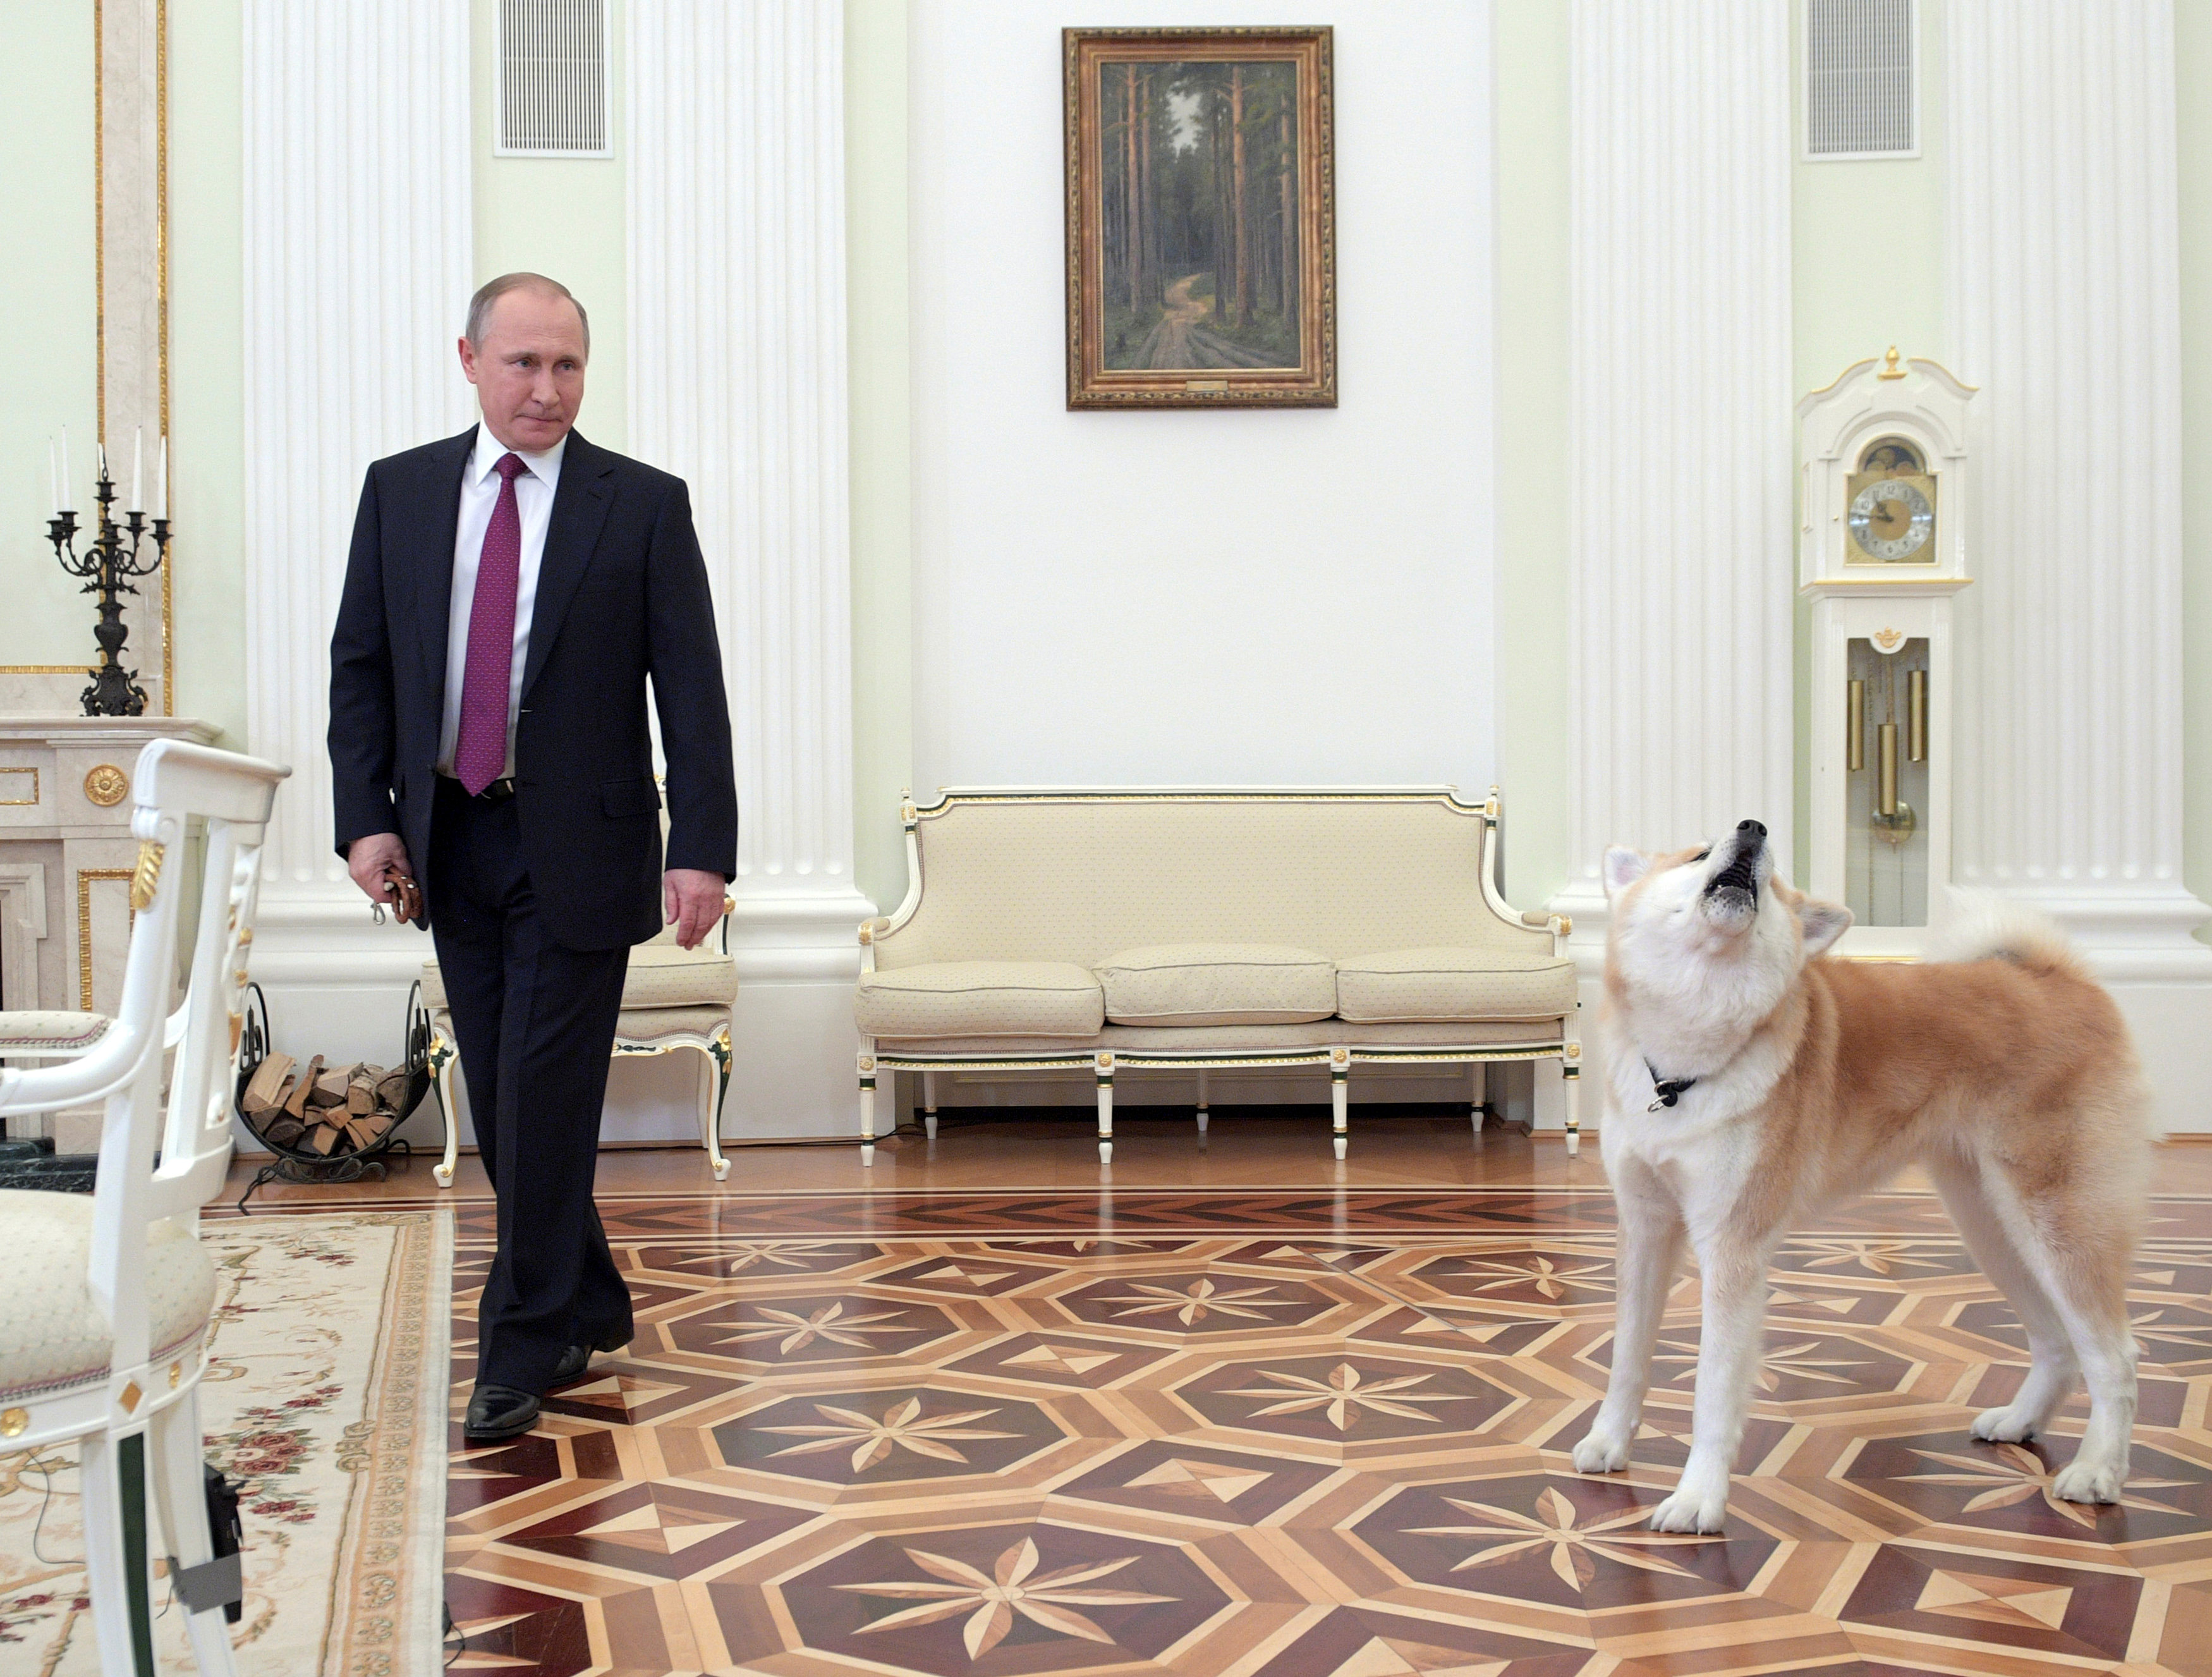 Russian President Vladimir Putin enters a hall with his dog Yume, a female Akita Inu, before giving an interview to Japanese Nippon Television and Yomiuri newspaper at the Kremlin in Moscow, Russia, December 7, 2016. Sputnik/Kremlin/Alexei Druzhinin via R